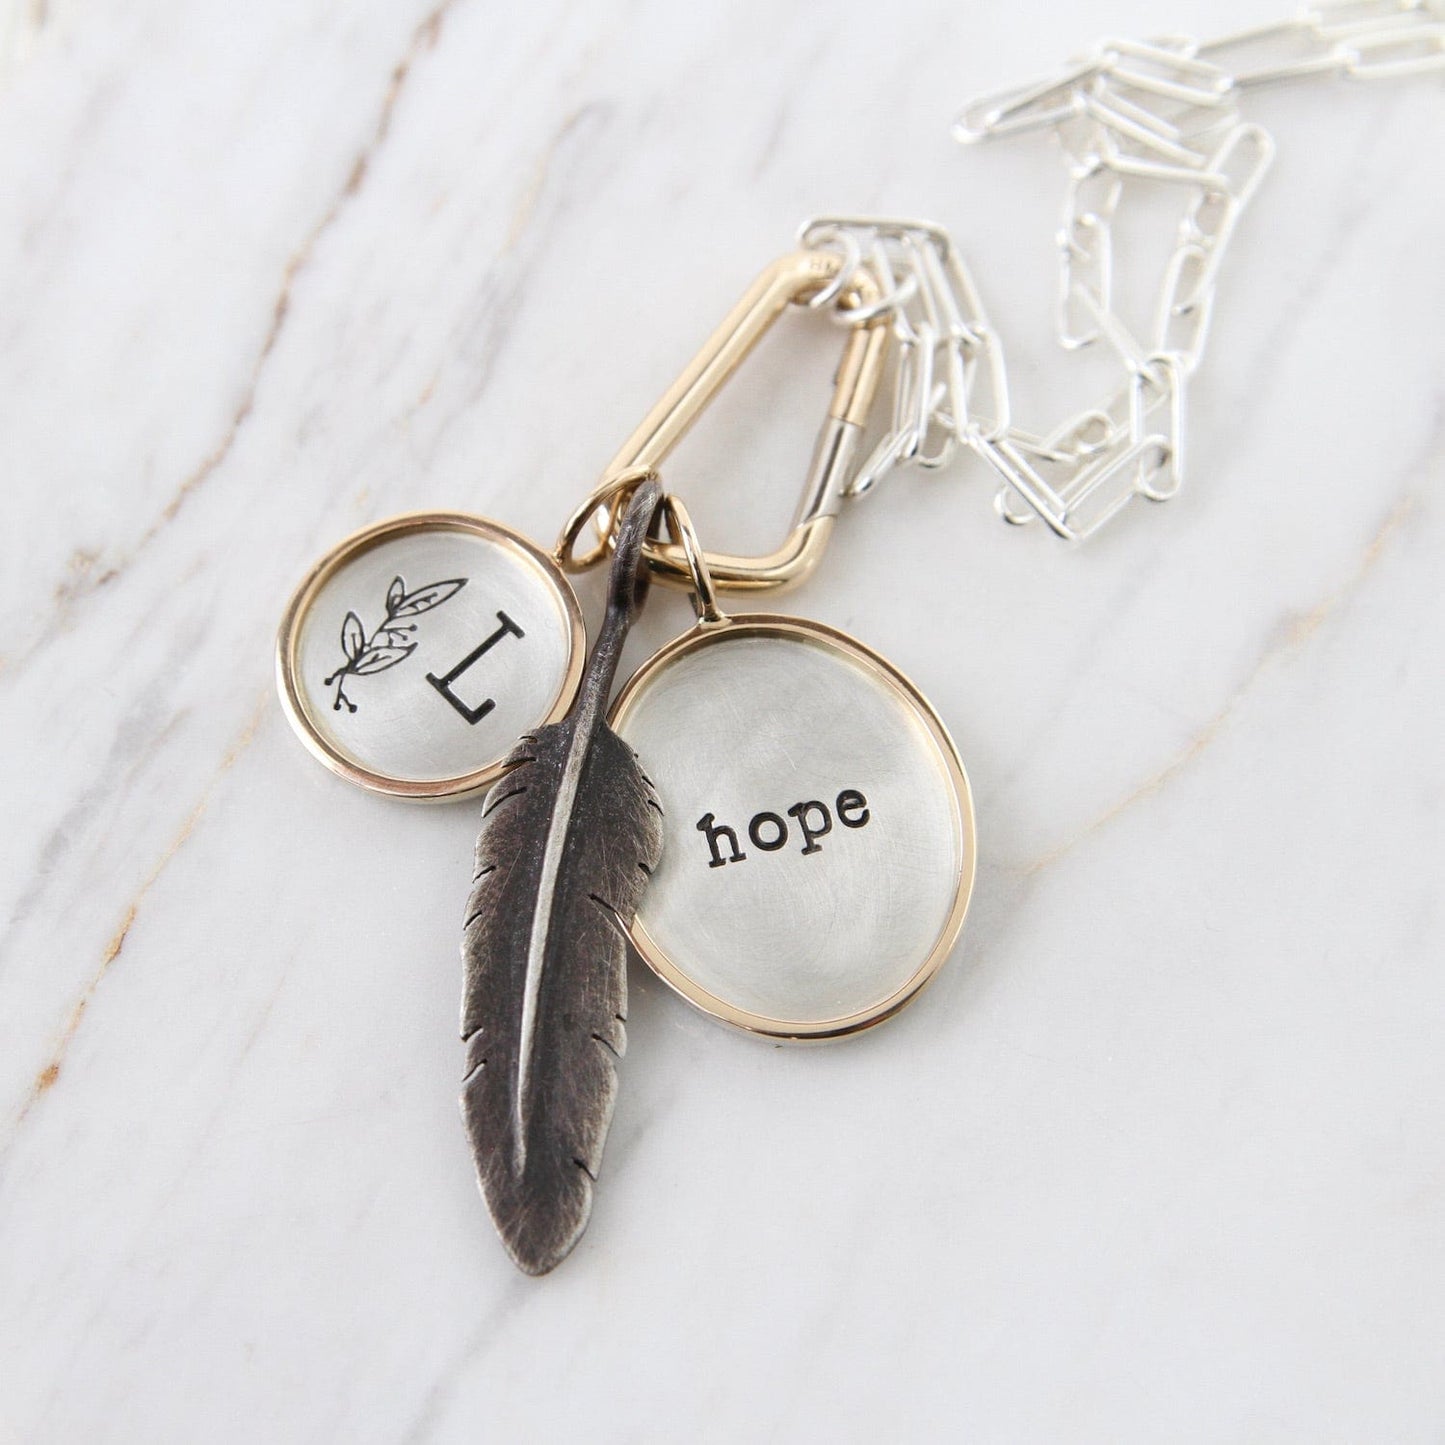 CHM "hope" Sterling Silver and 14K Gold Charm